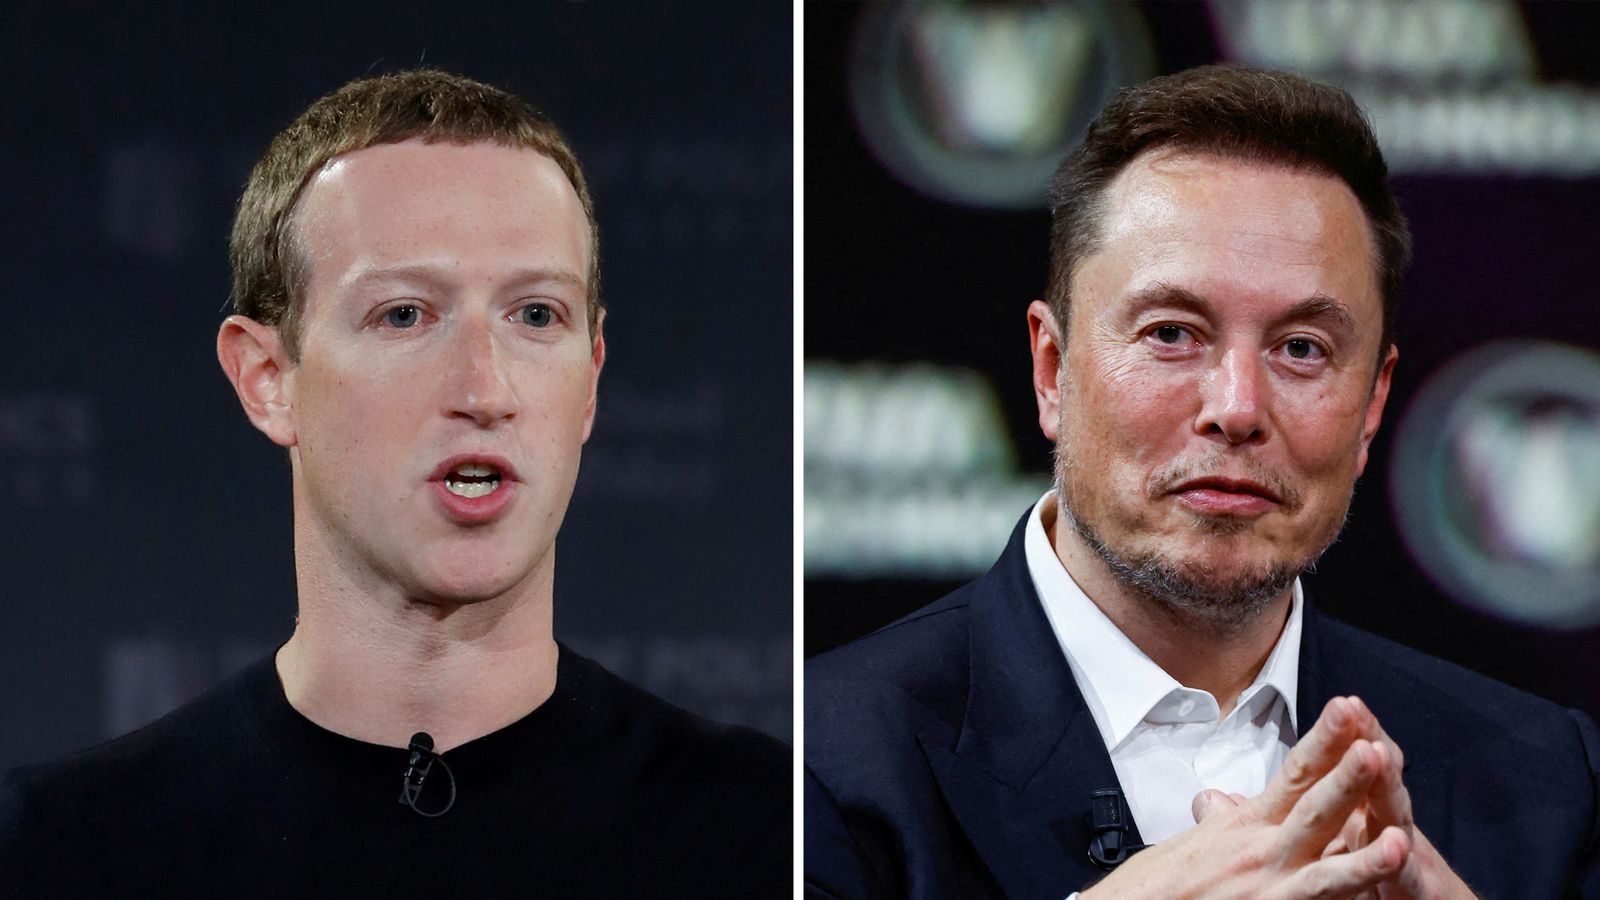 Mark Zuckerberg and Elon Musk 'dead serious' about cage fight, says UFC boss